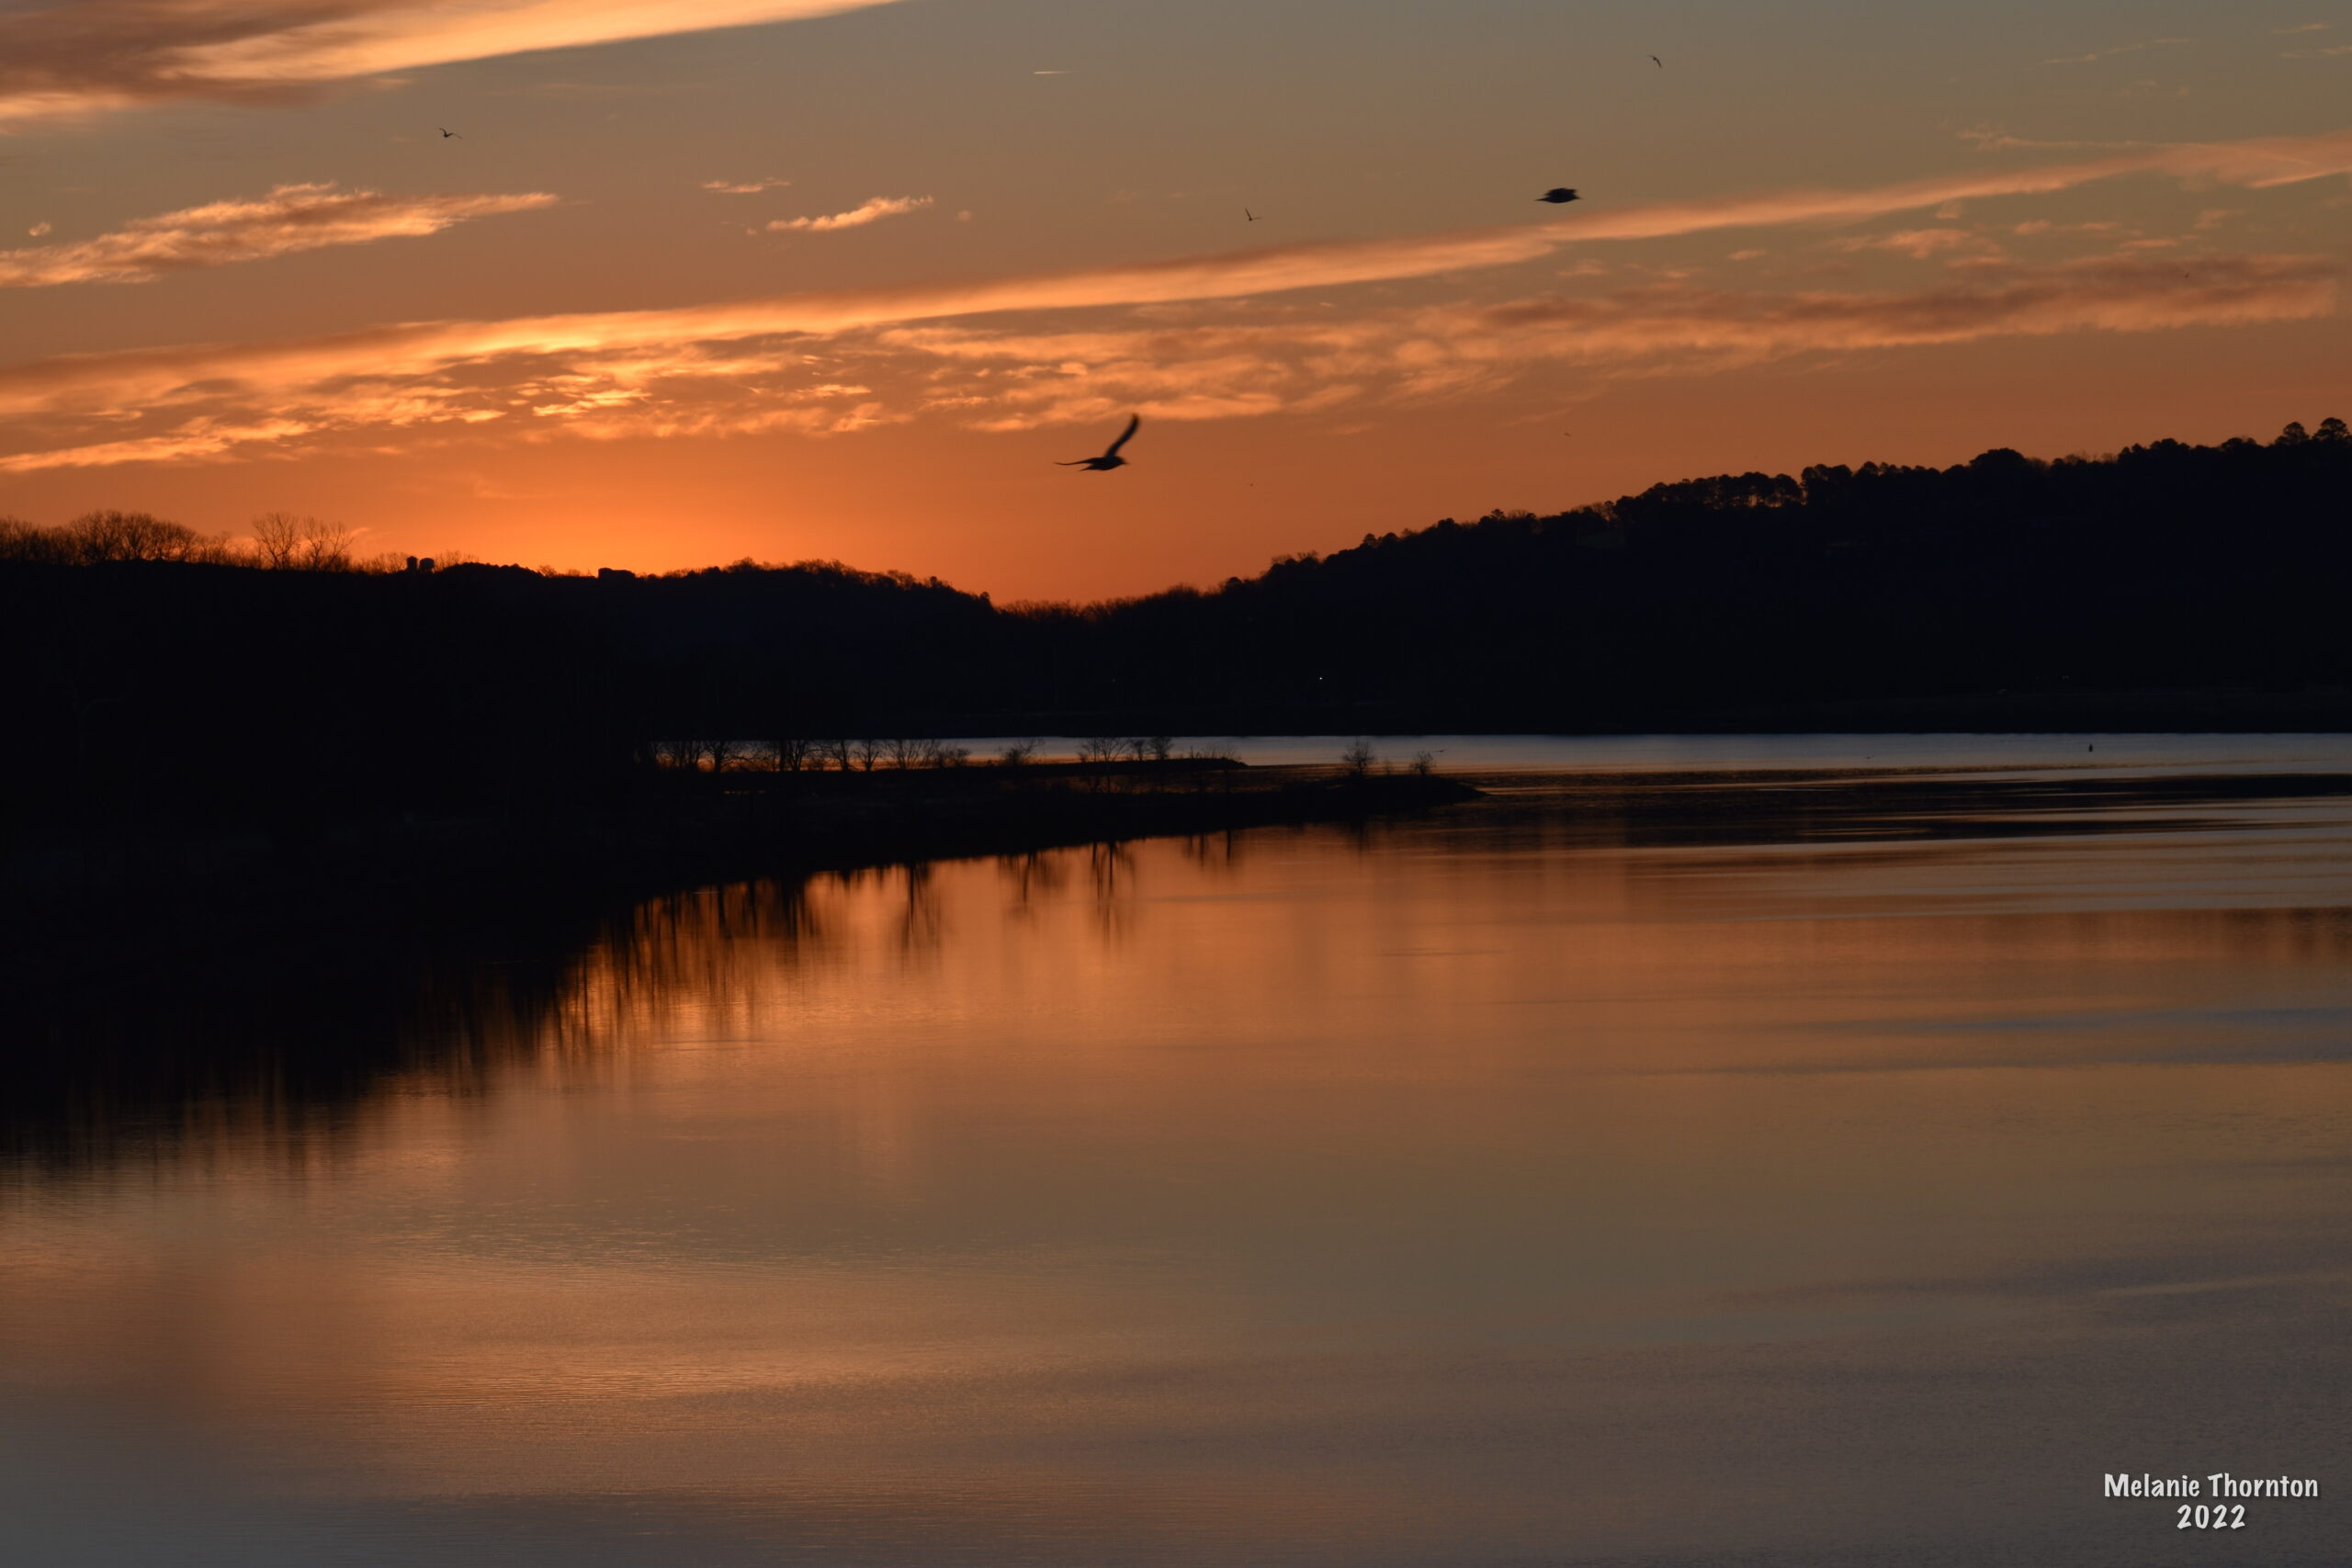 A large body of water reflects an orangeade blue sky above and the trees along the shoreline. A bird is silhouetted by the bright sky.